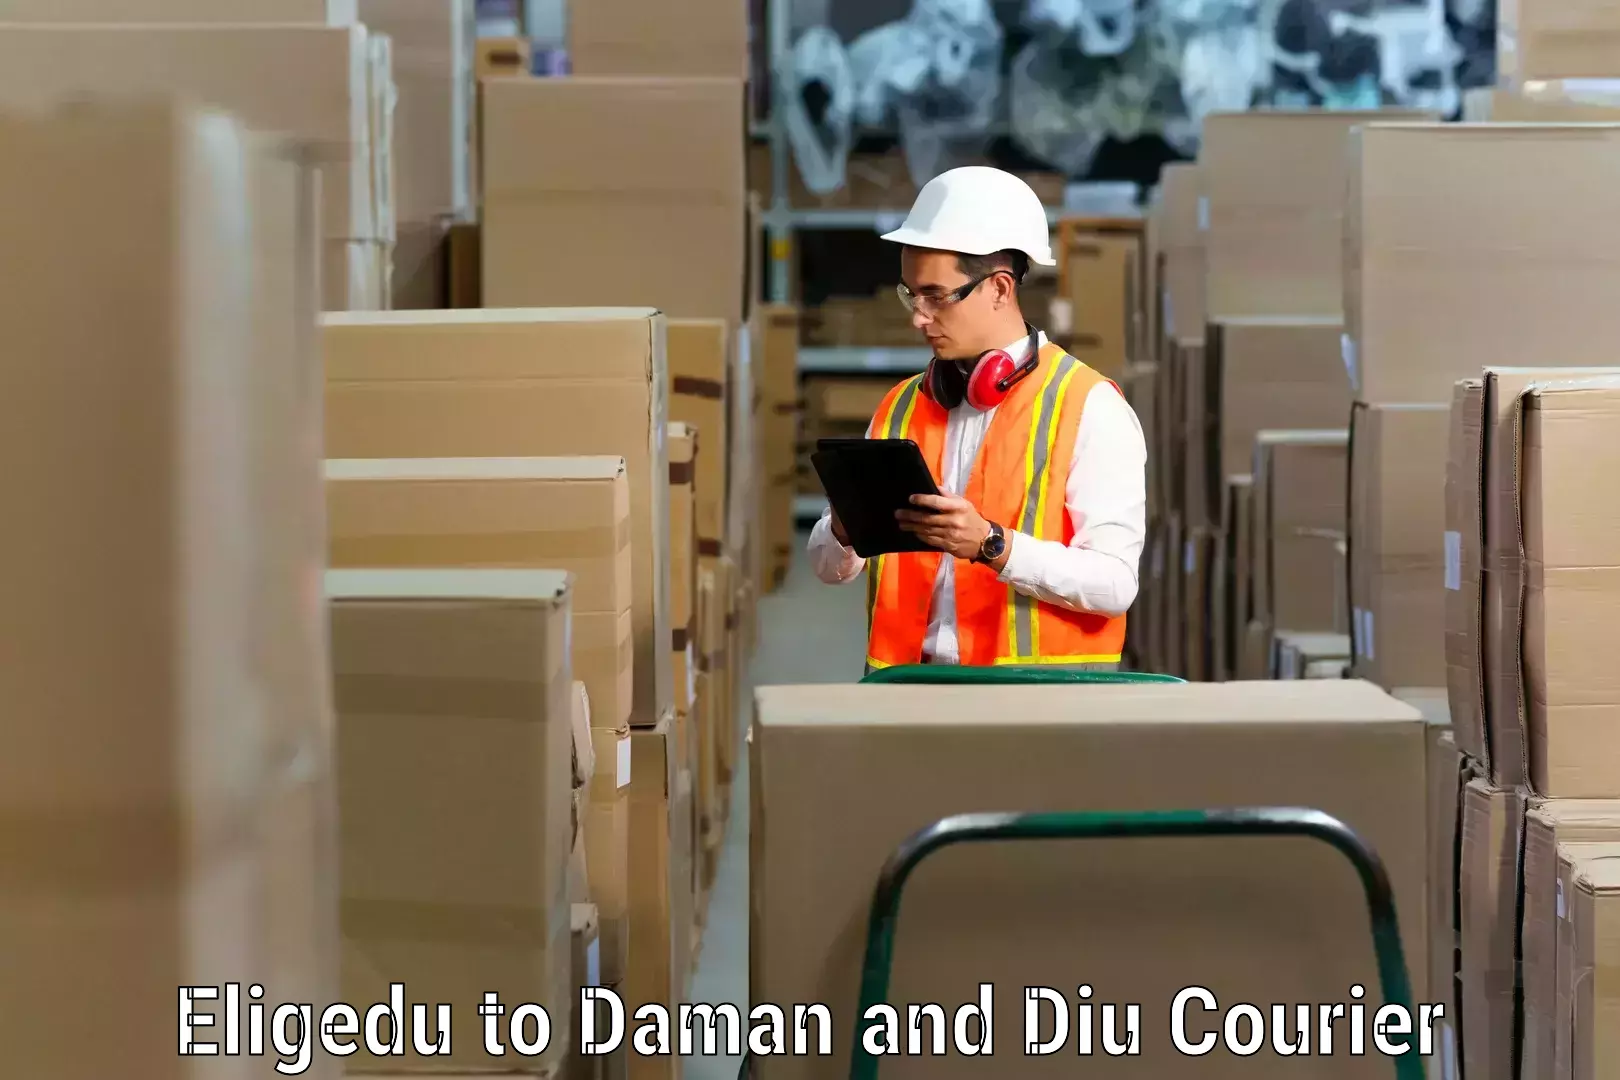 Household goods transport service Eligedu to Diu